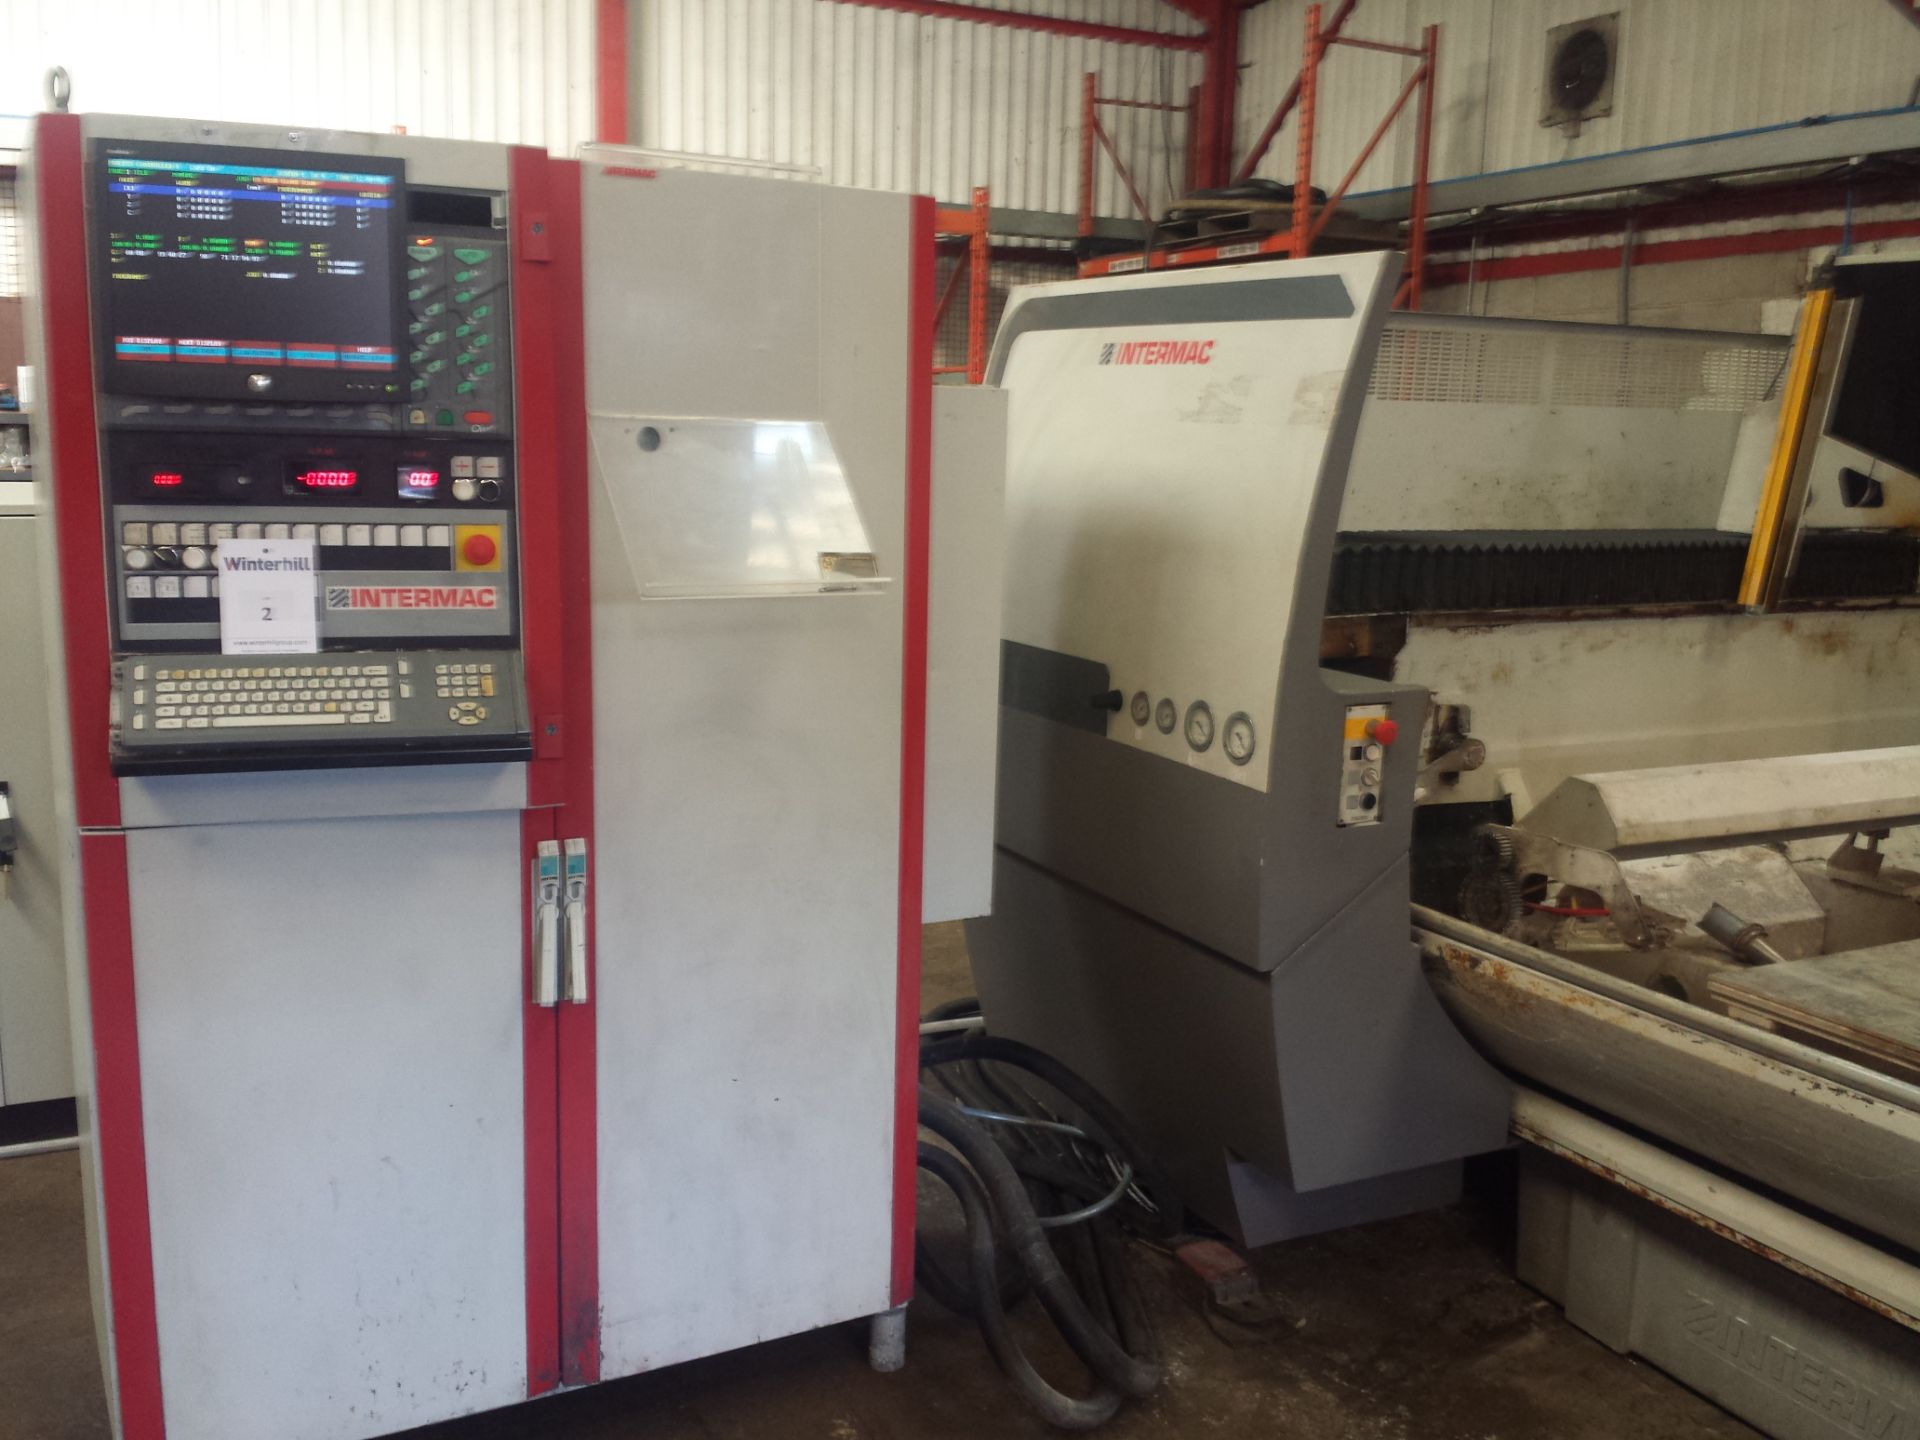 Intermac Pro C, CNC Machining Centre 4000×2000 Bed Size with S10 Numerical Control Unit, Serial